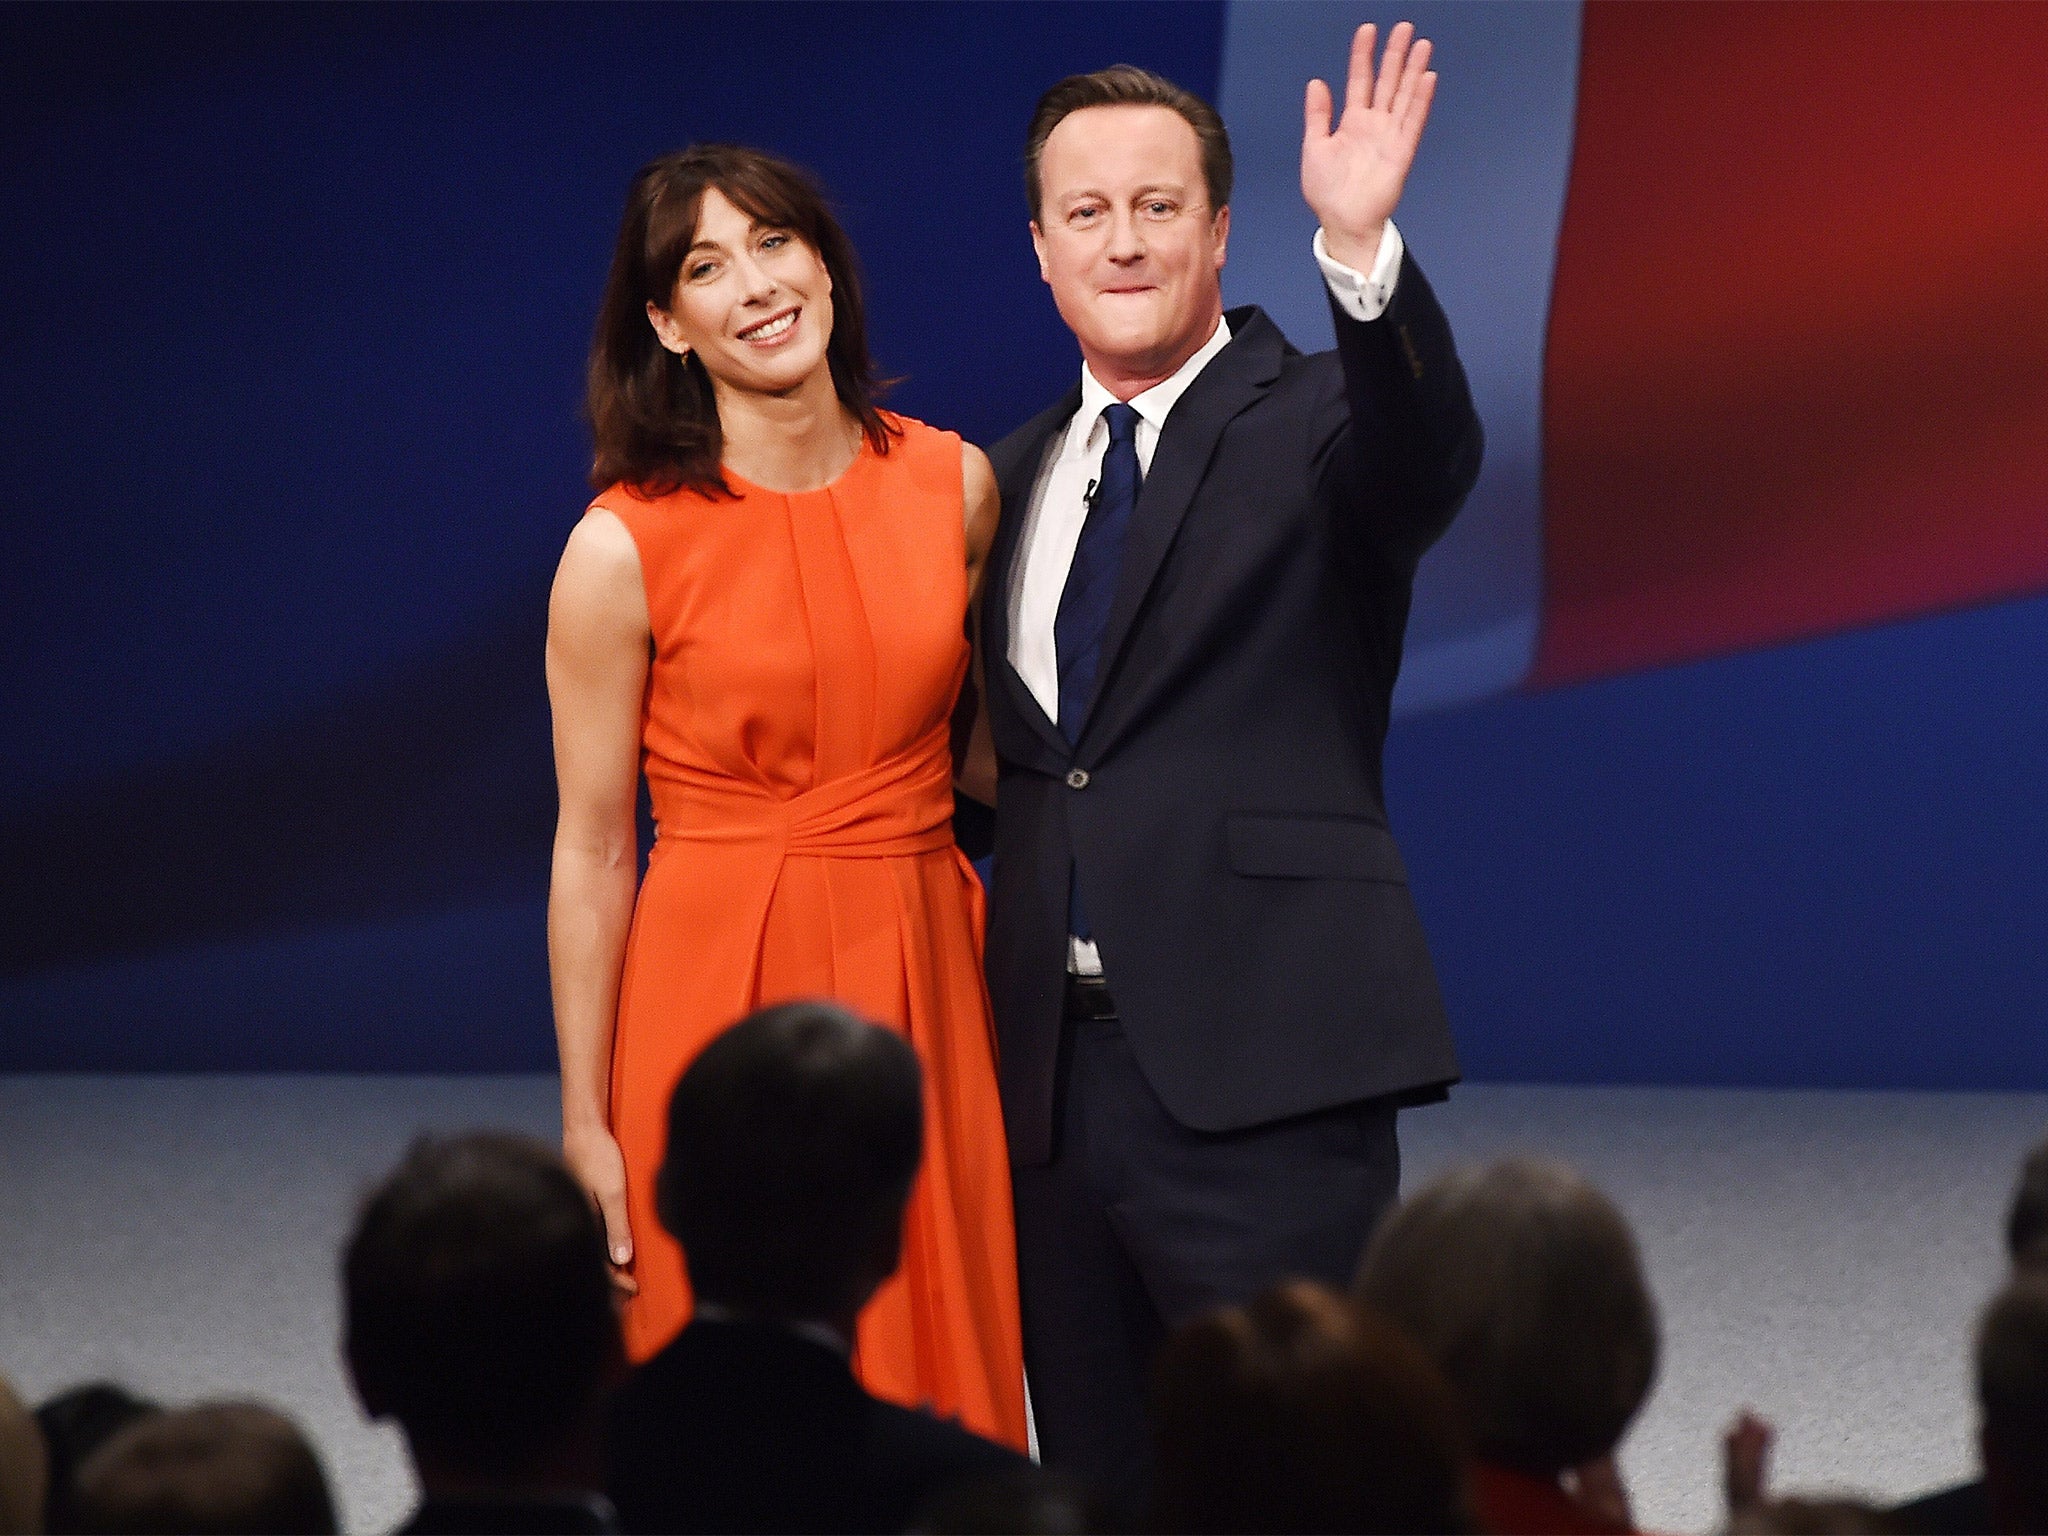 David Cameron and his wife Samantha milk the applause after his keynote speech